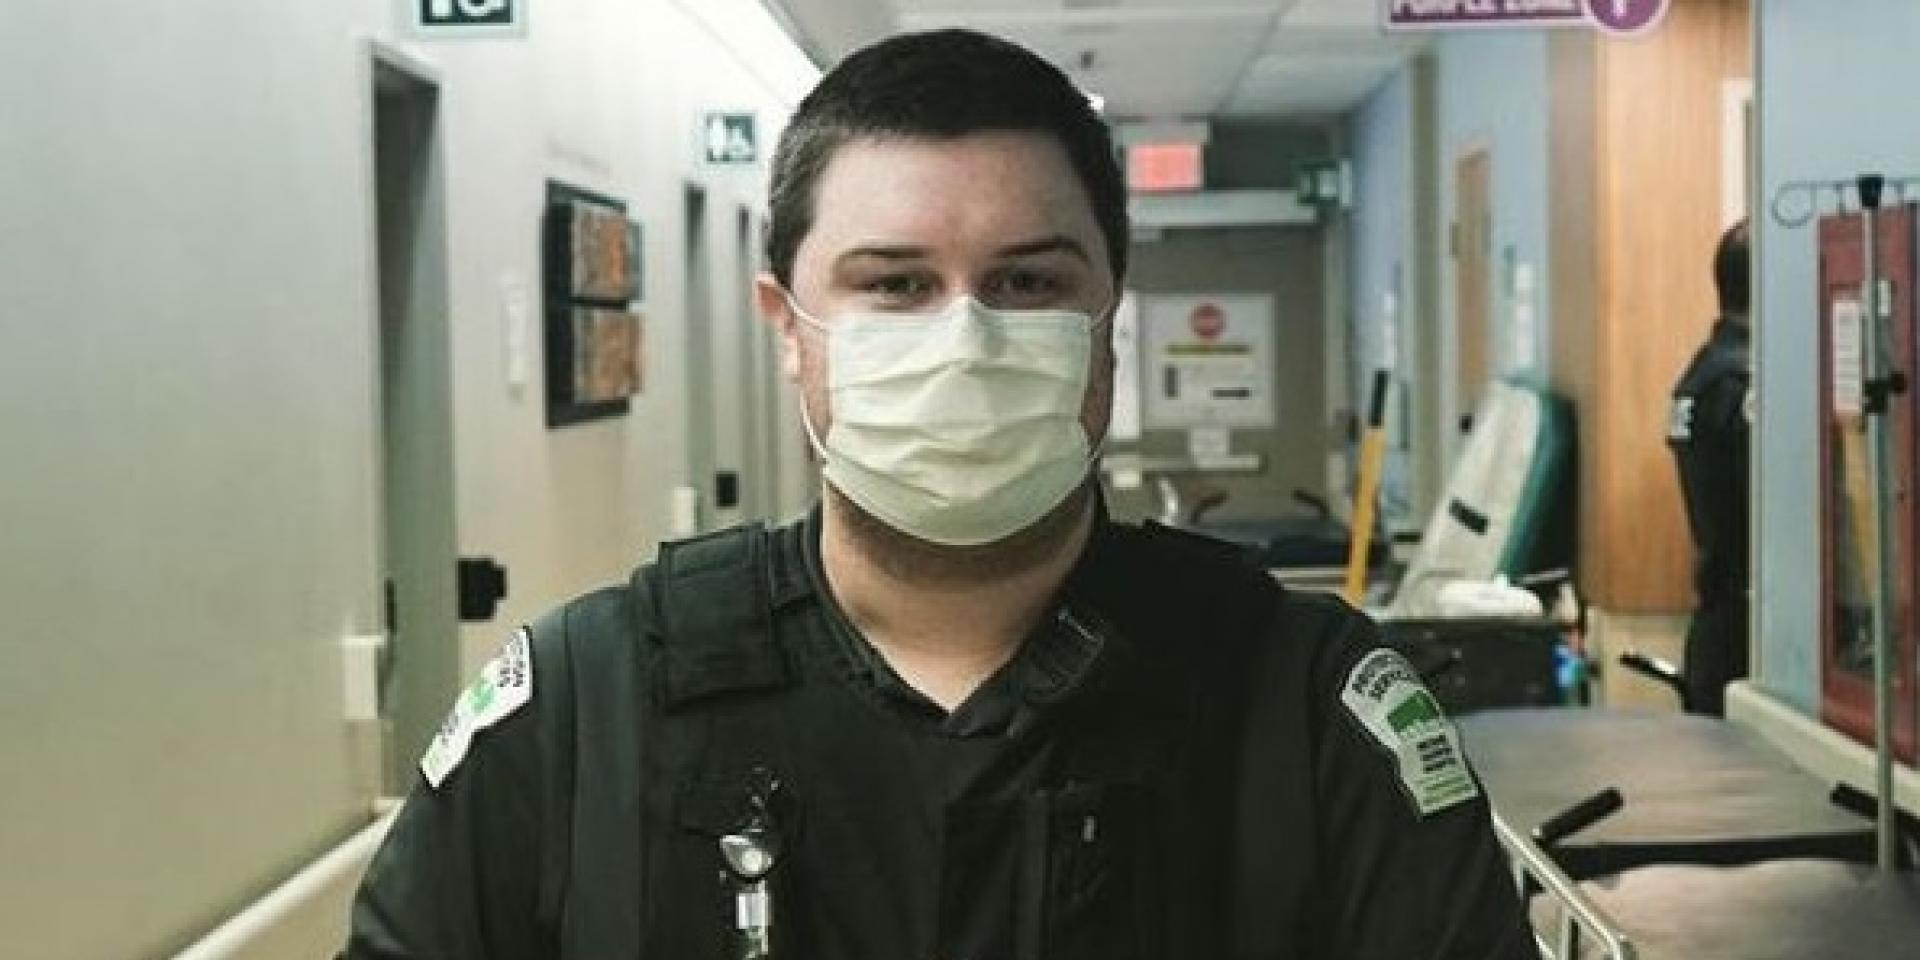 security guard wearing a mask 